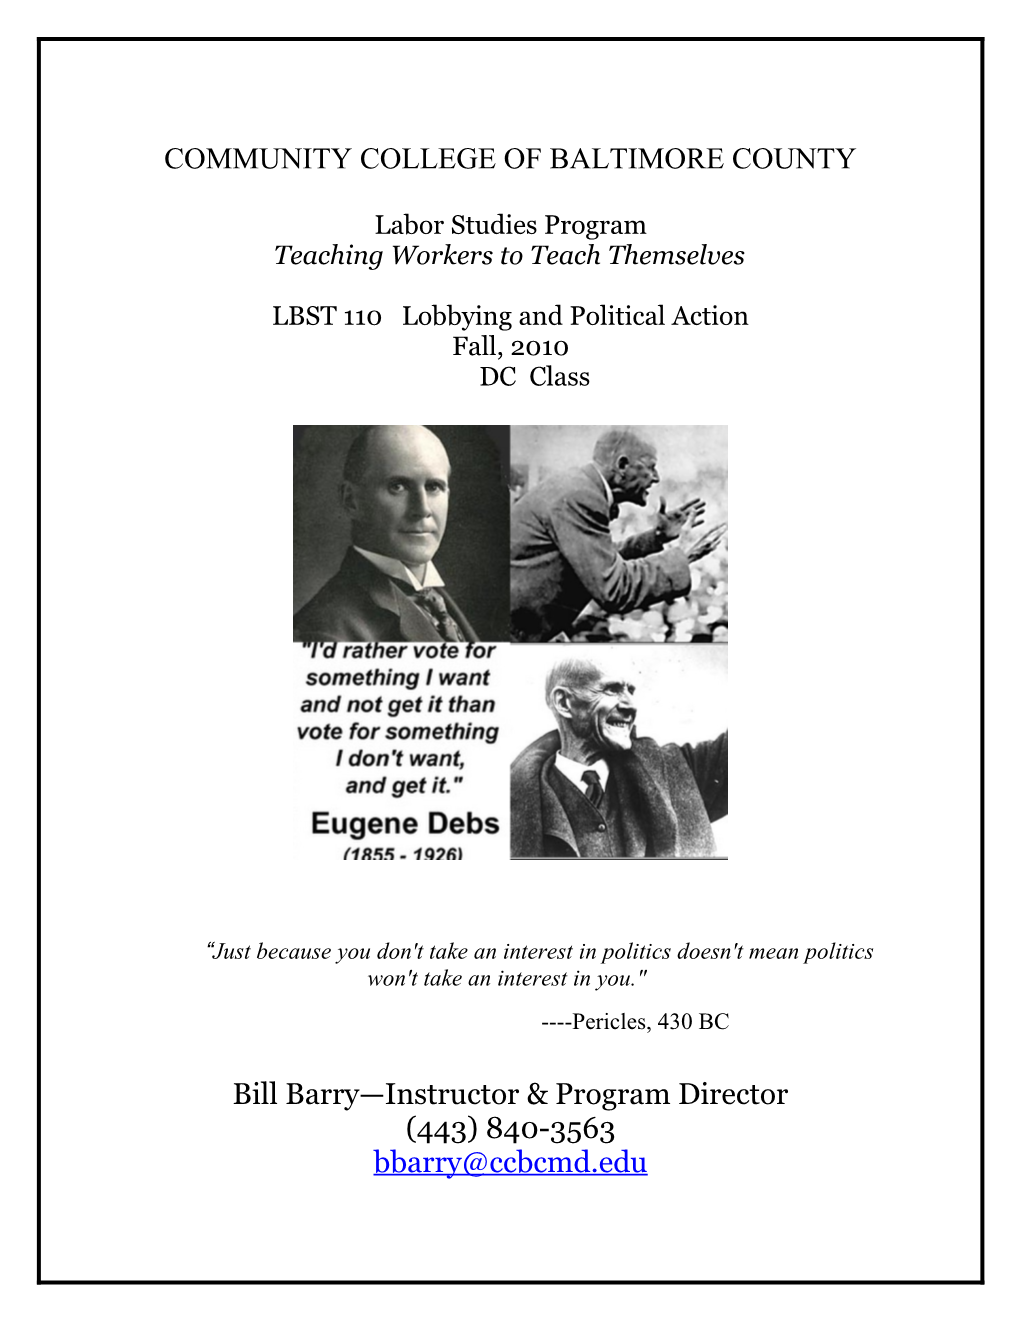 Community College of Baltimore County s1